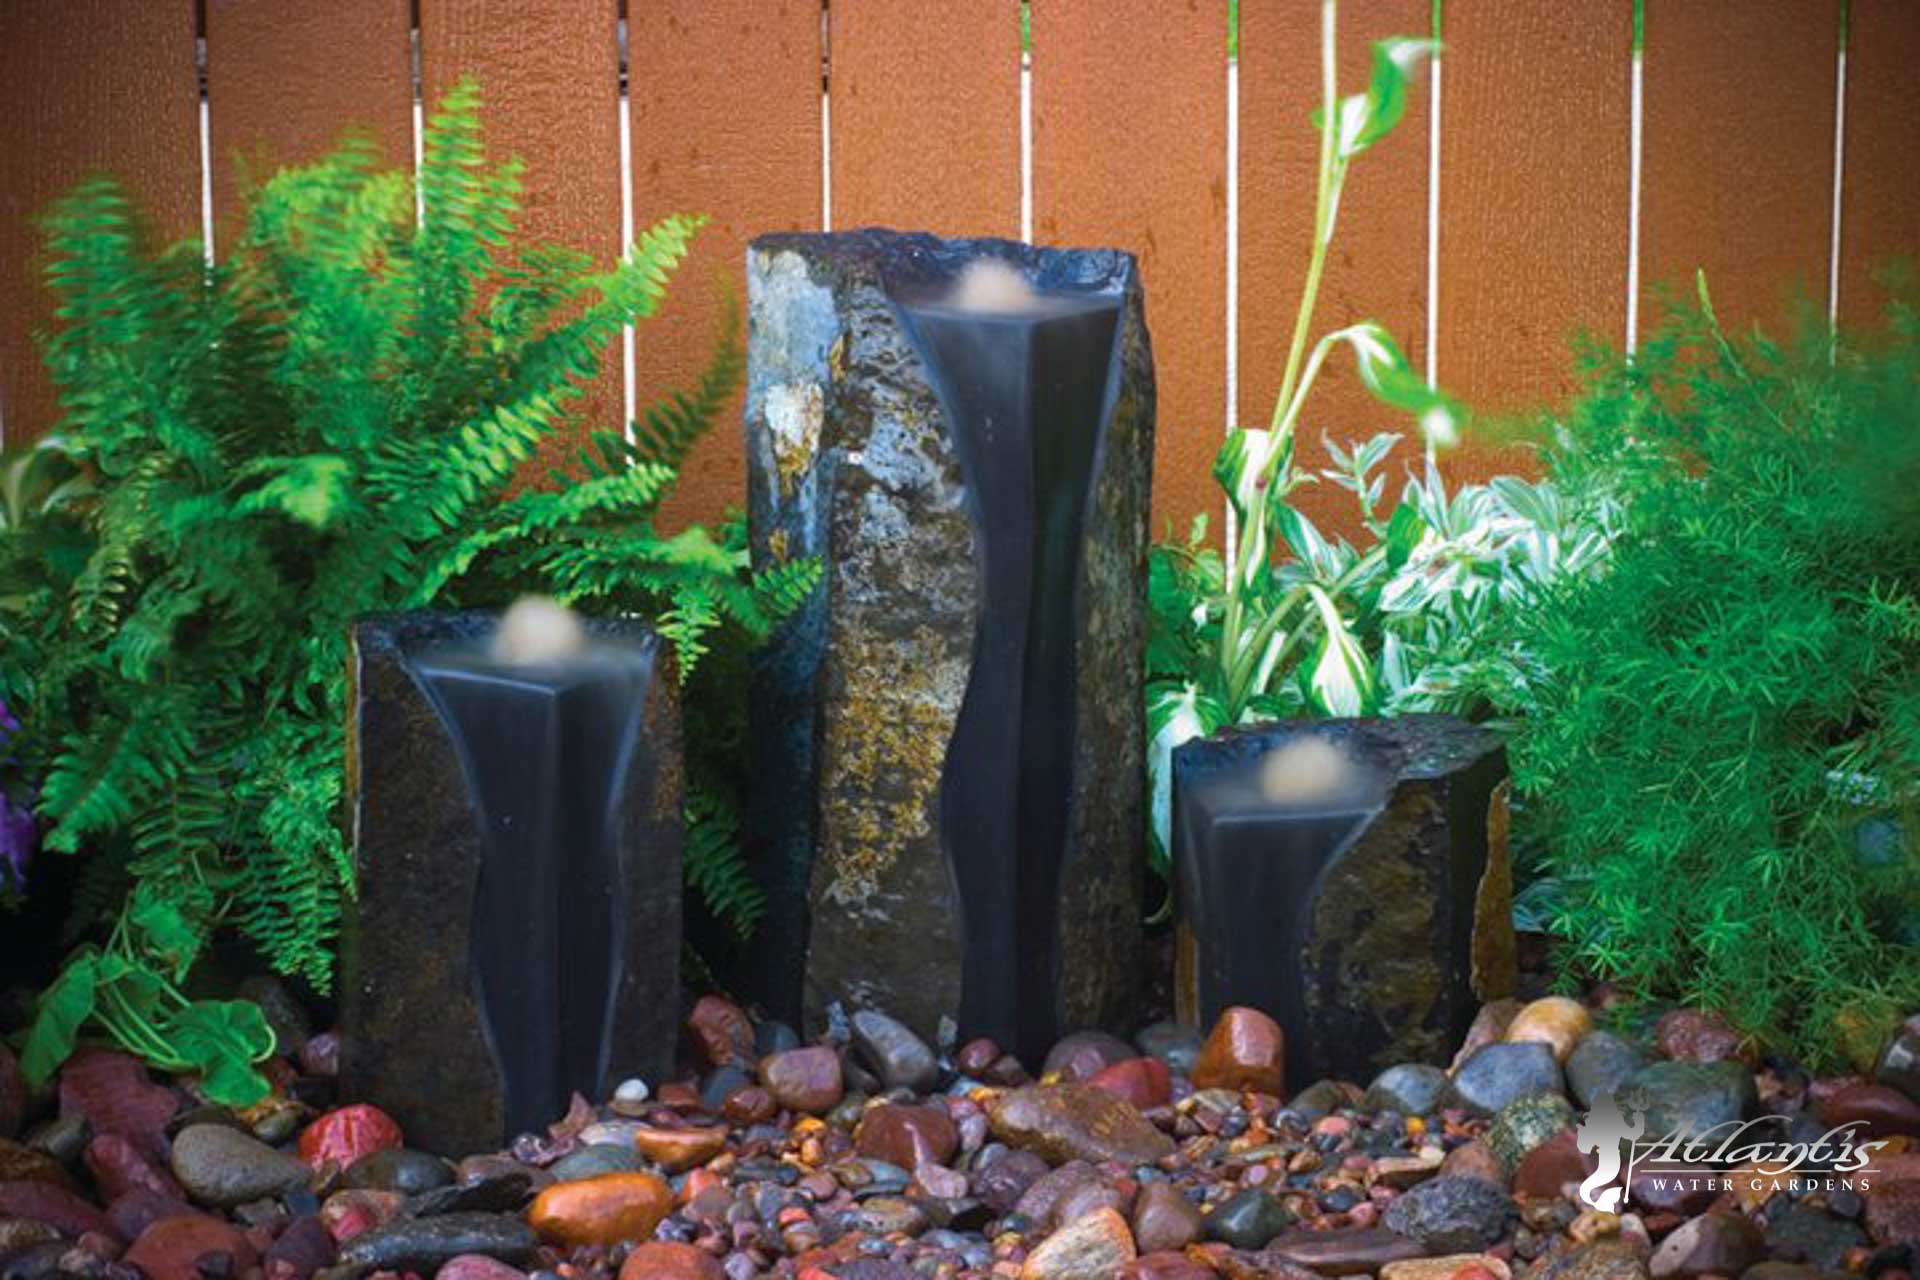 3 Things to Consider When Installing an Outdoor Fountain